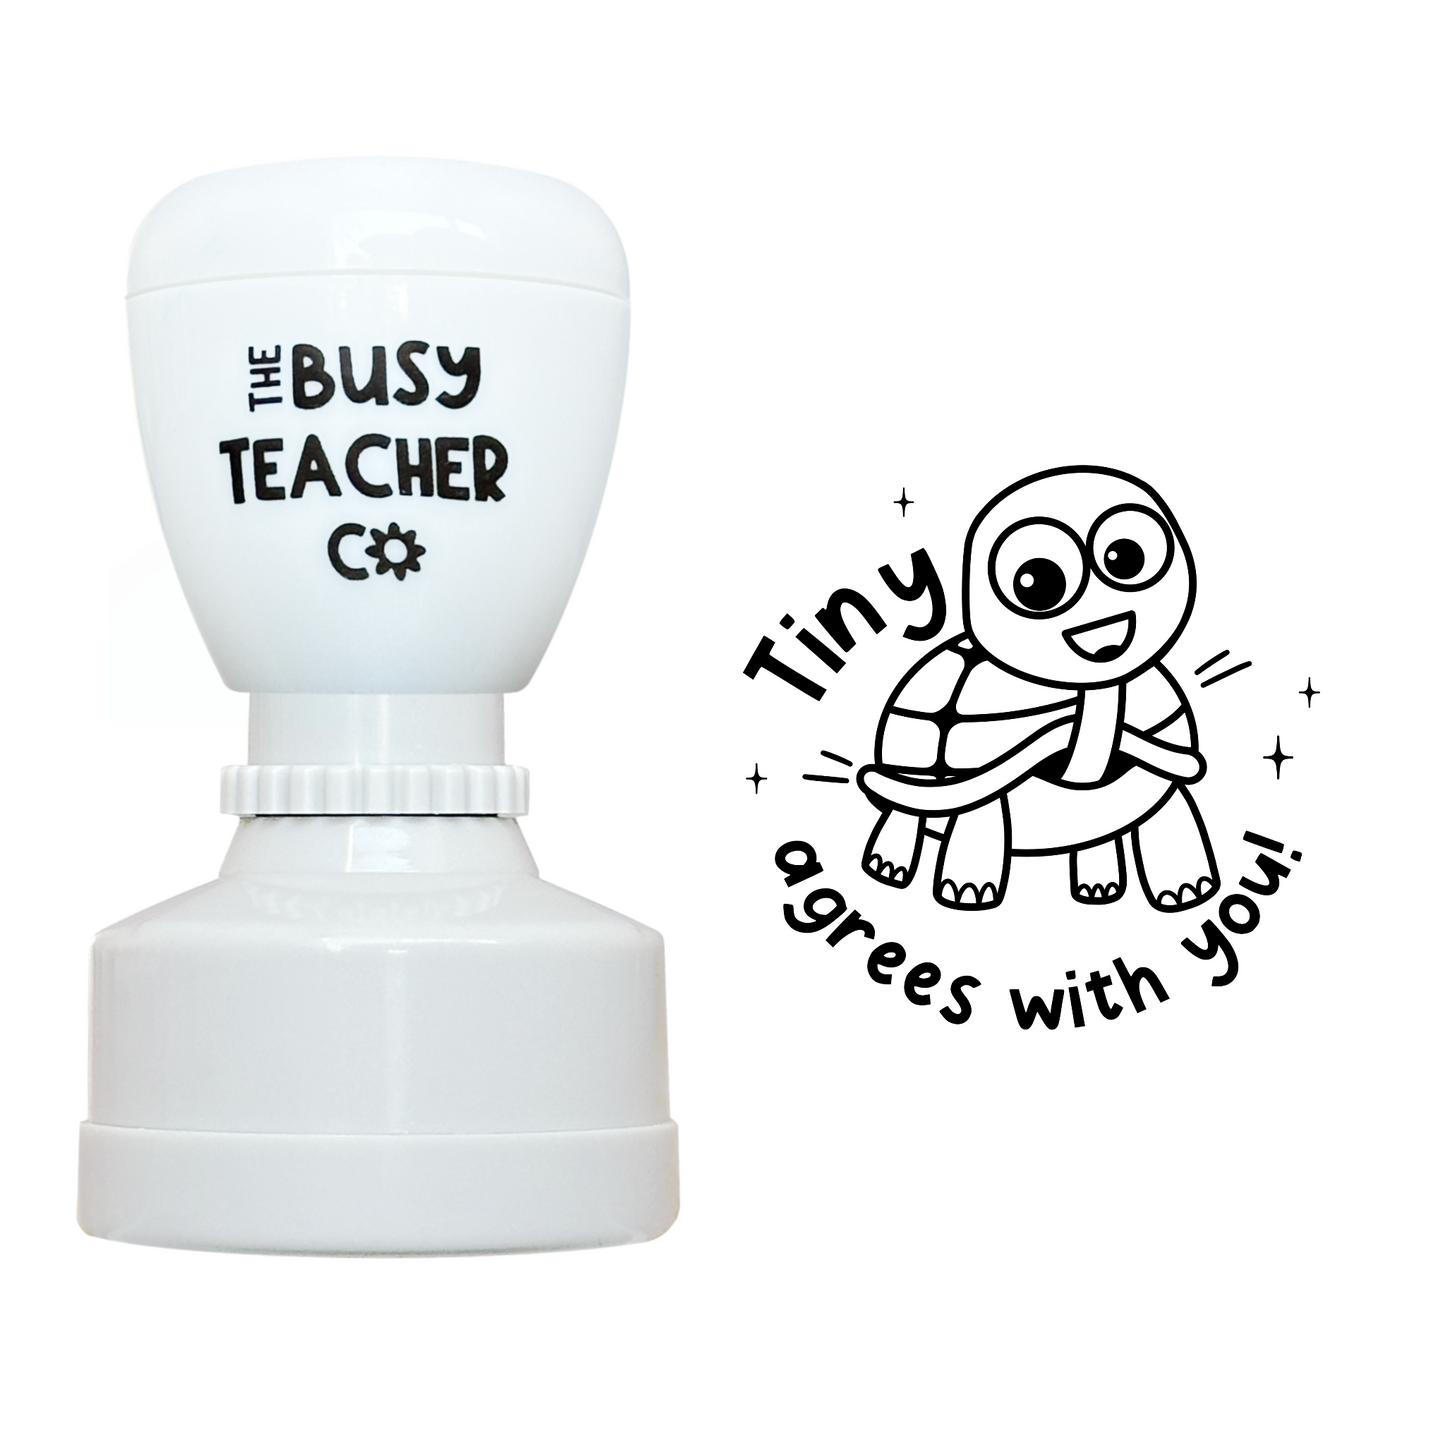 White Rose Tiny Stamp- Tiny Agrees With You